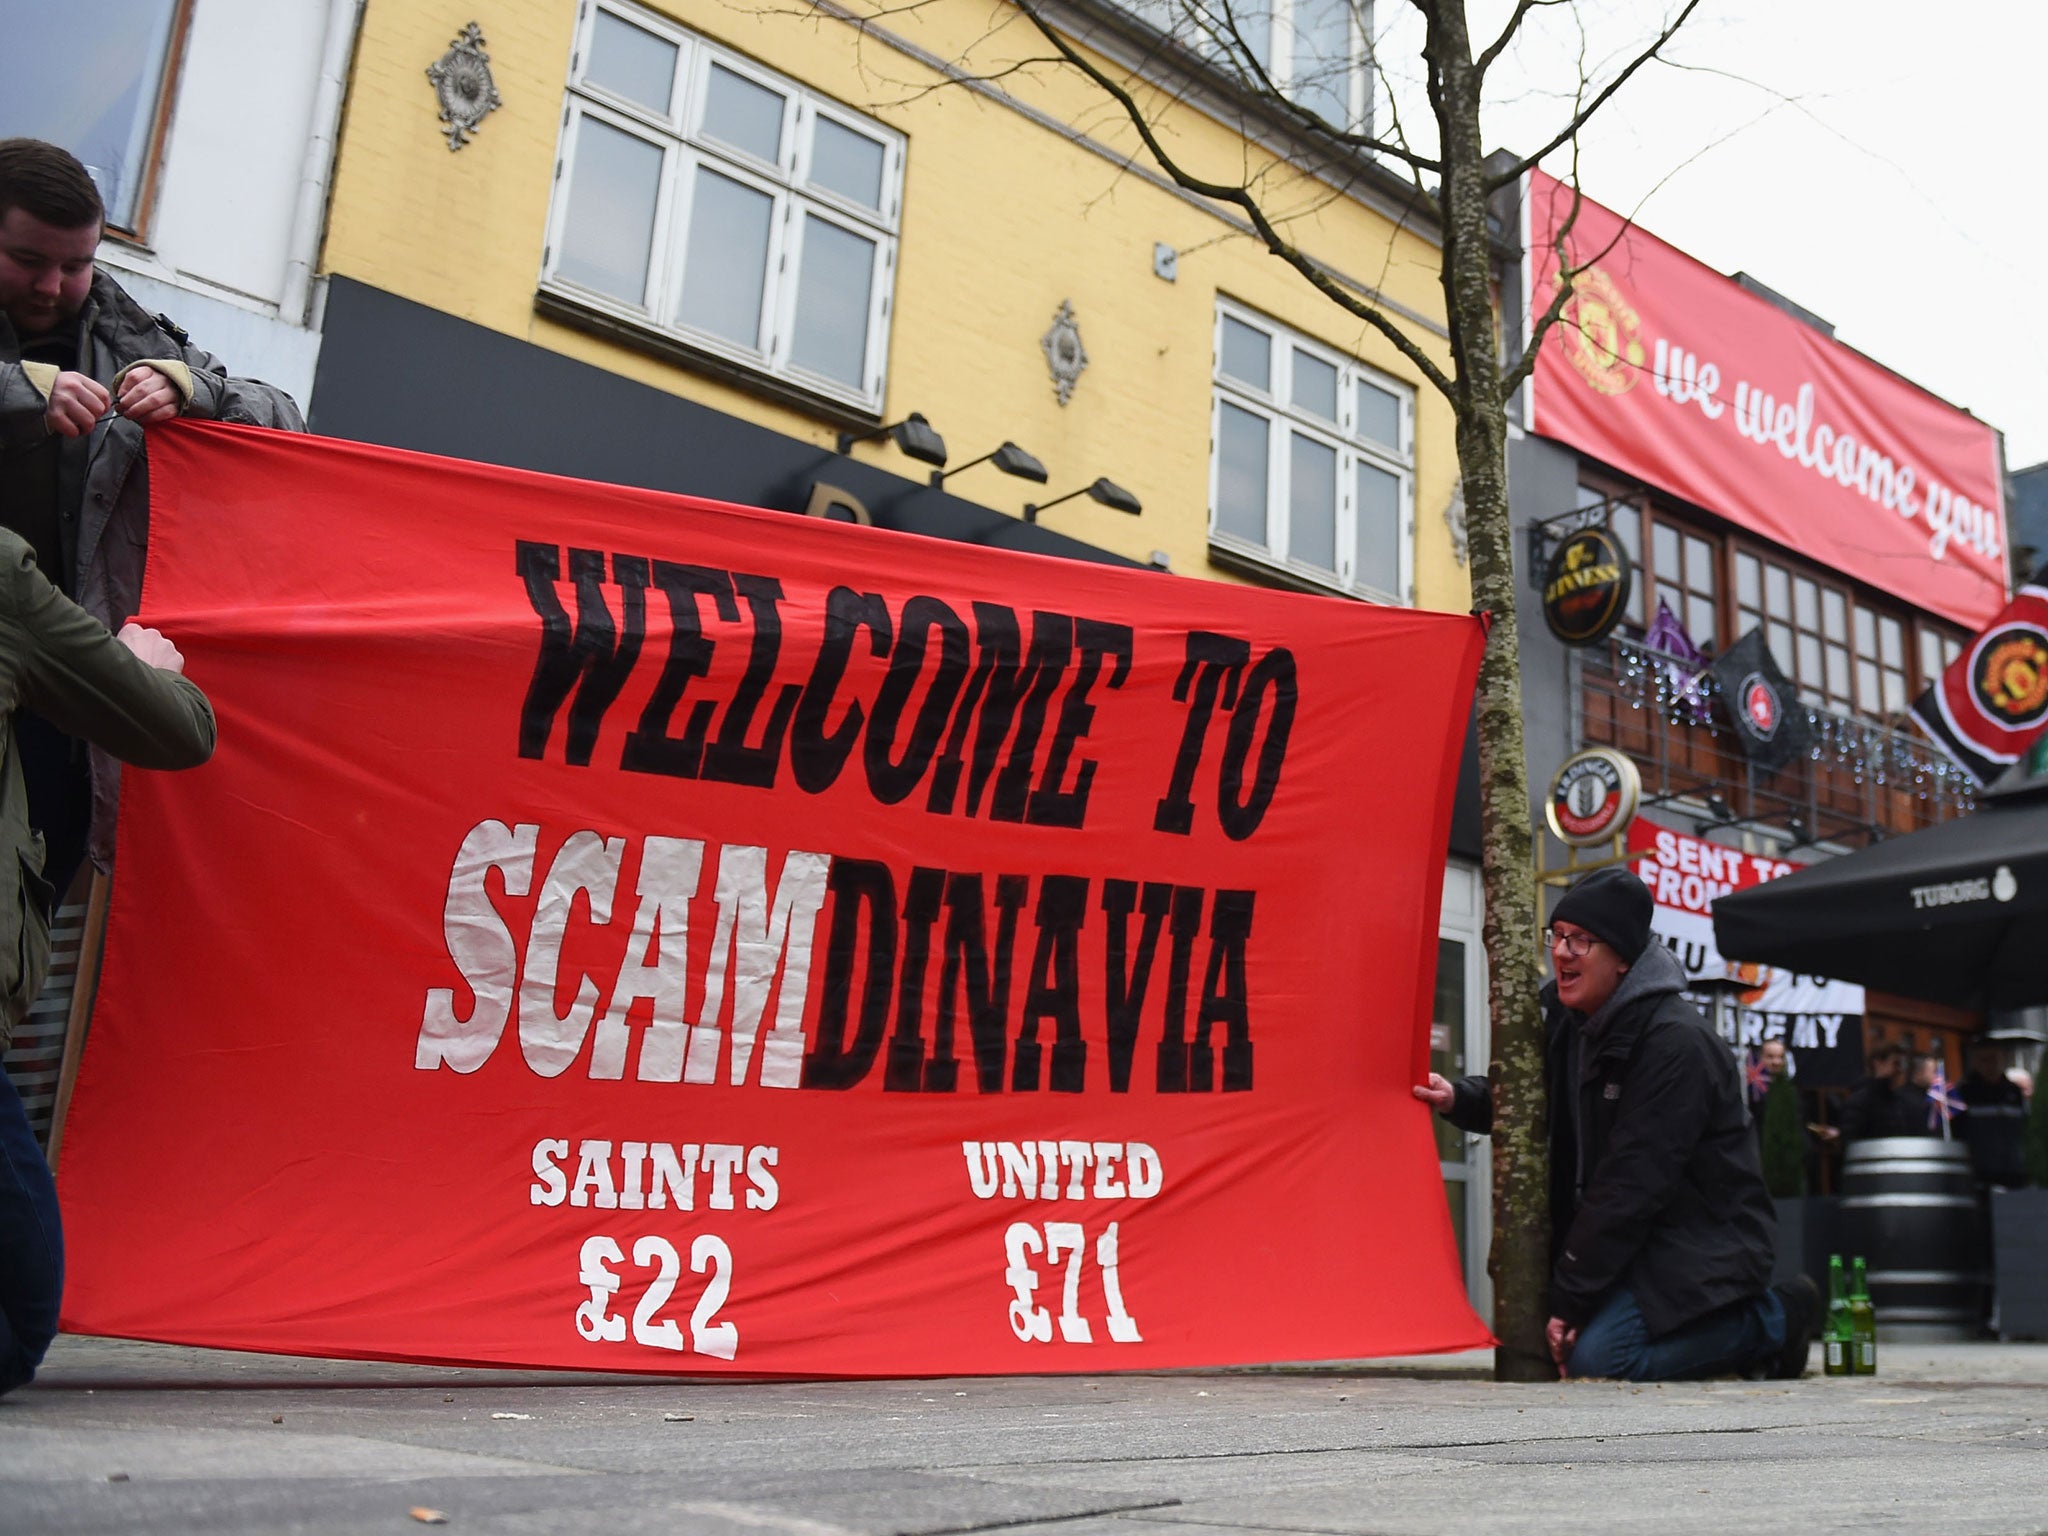 Manchester United fans protest against ticket prices for the Europa League tie with Midtjylland